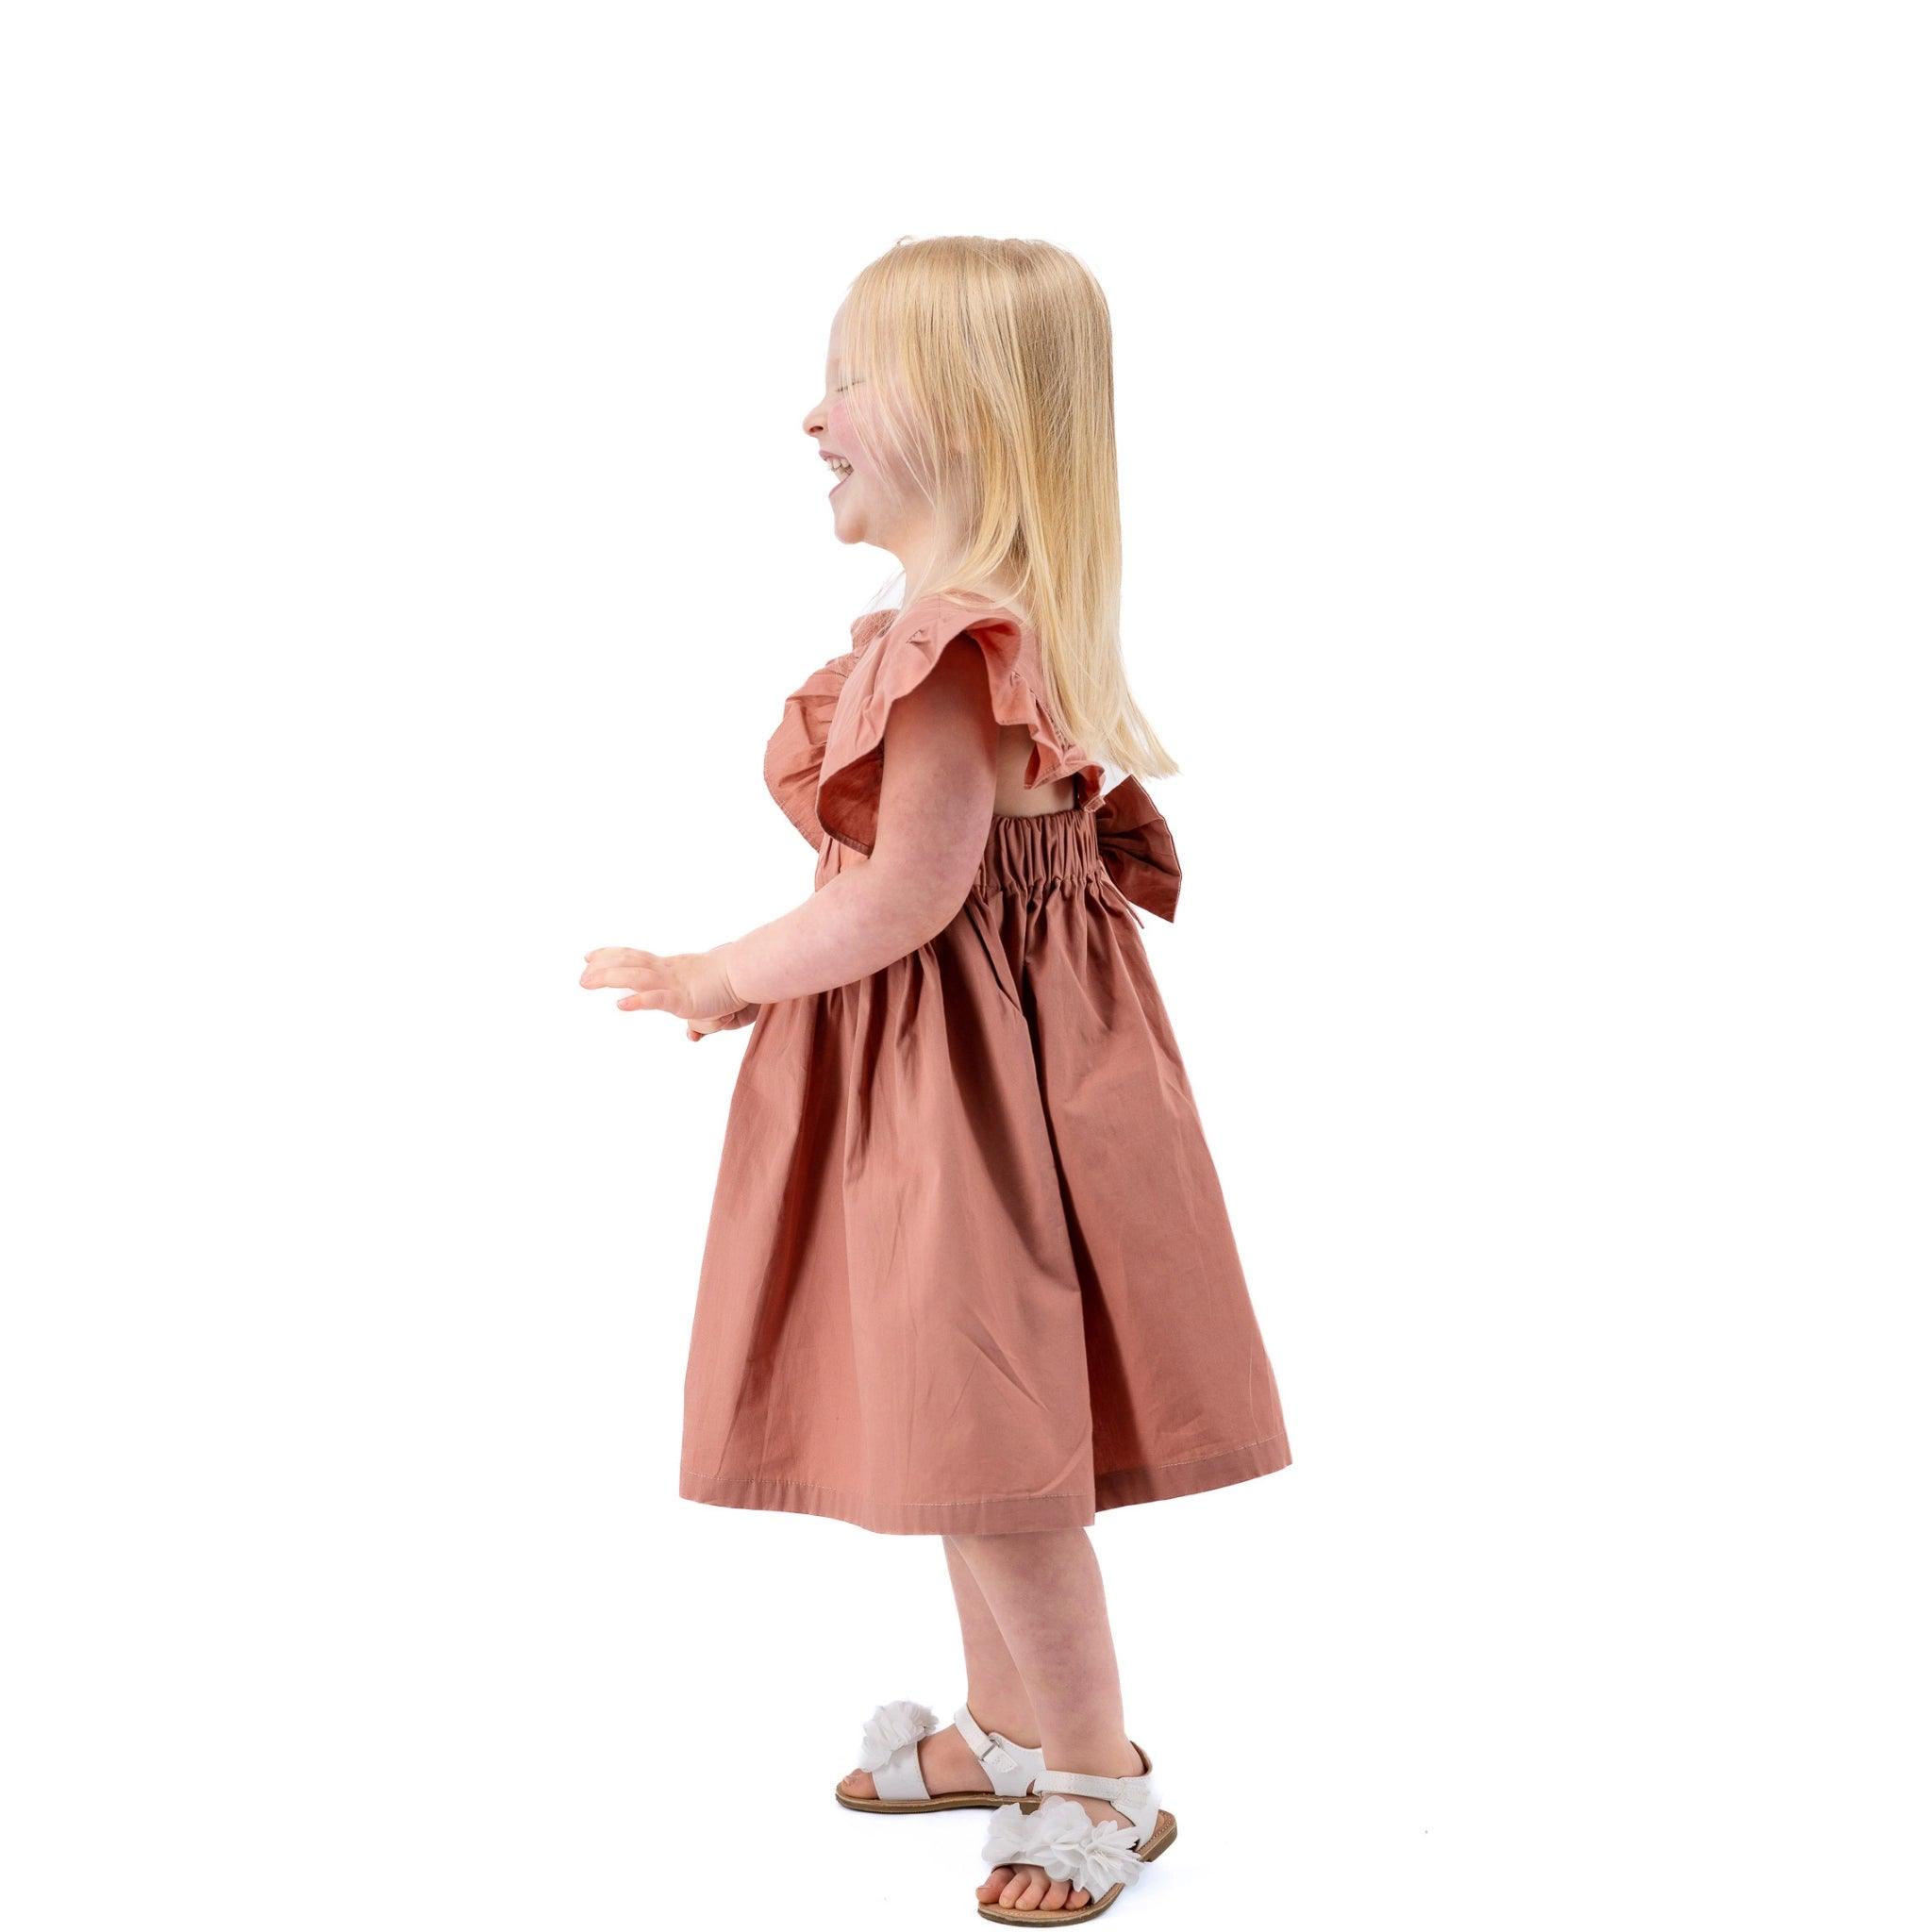 Young girl in a Karee Brick Dust Cotton Floral Dress for Girls and white sandals smiling and walking to her right on a white background.